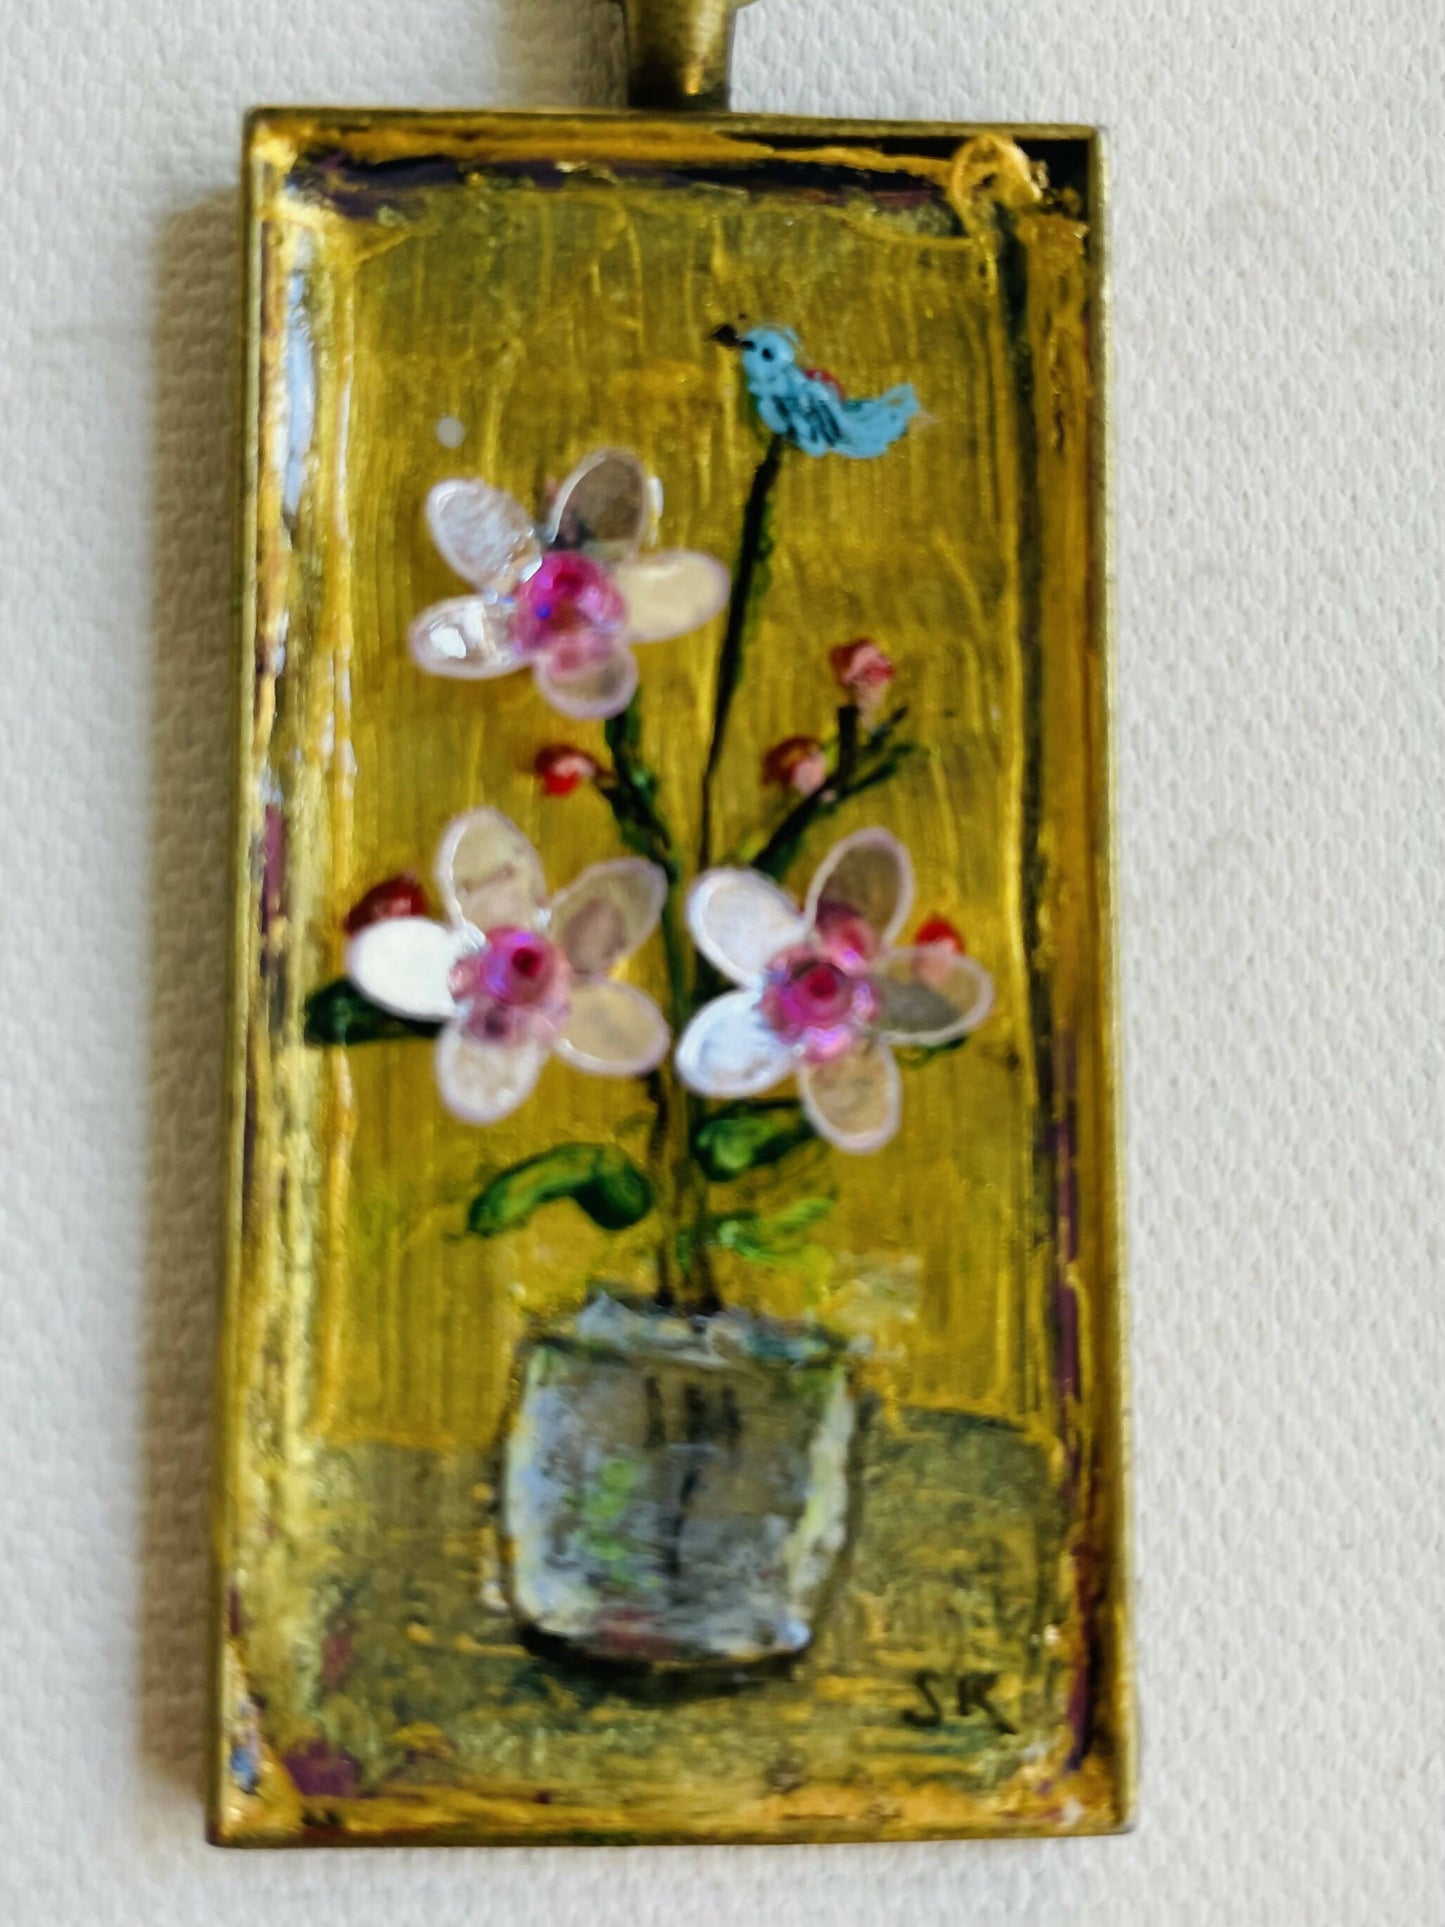 Tiny still life painting and vintage wallpaper backing